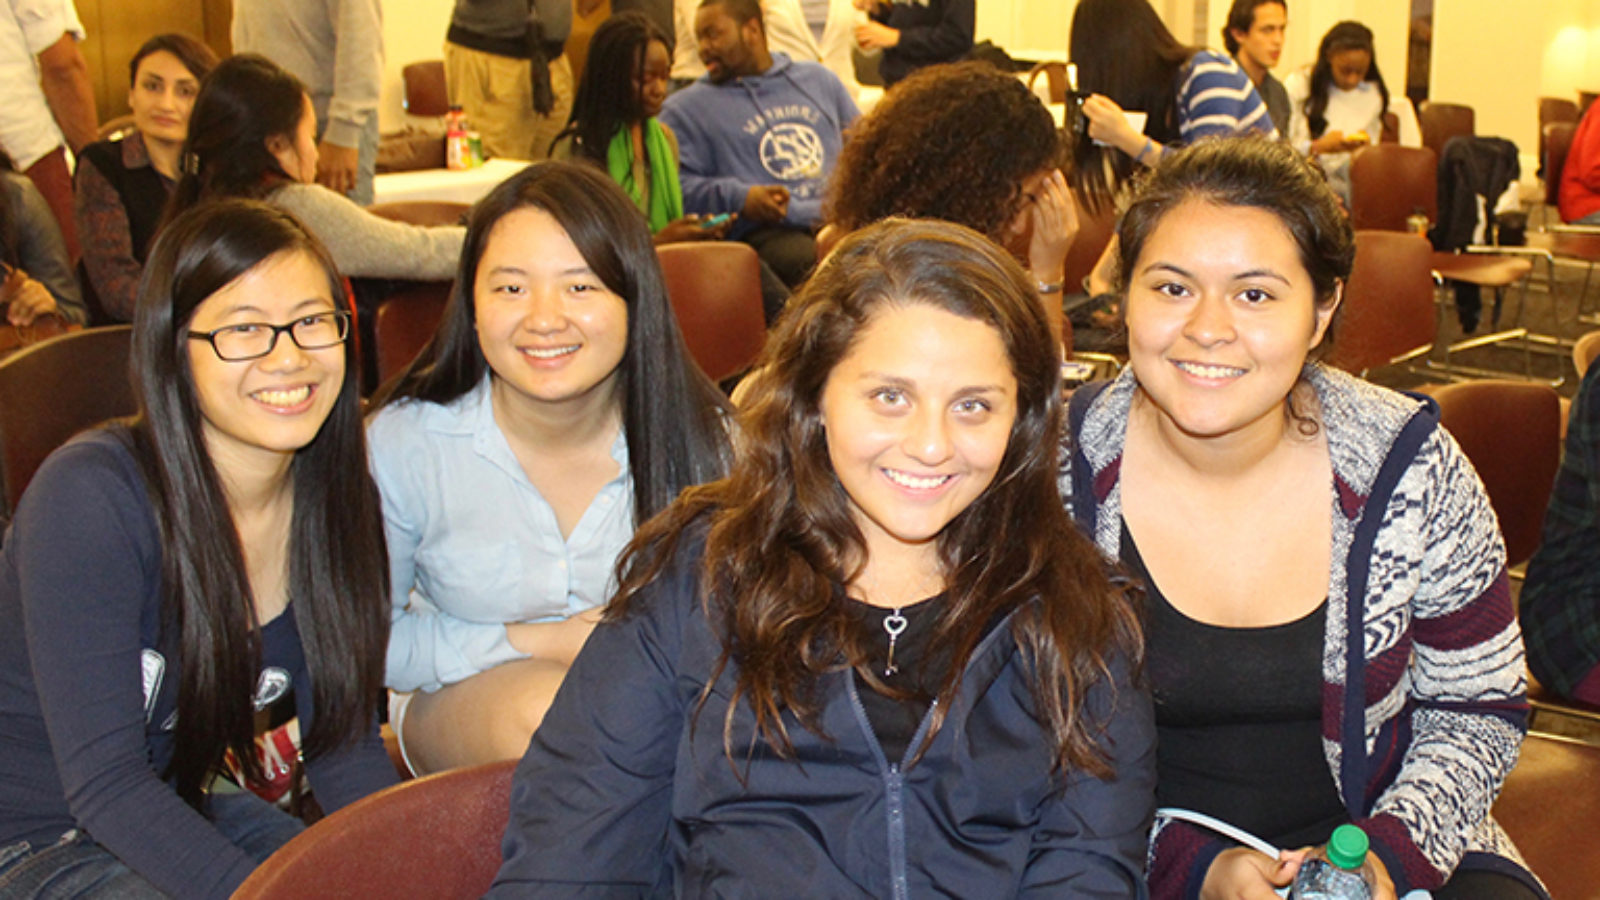 Students Florence Kong, Yingyu Ren, Angie Molina (C&#039;18) and Jessica Andino sit together at an event.